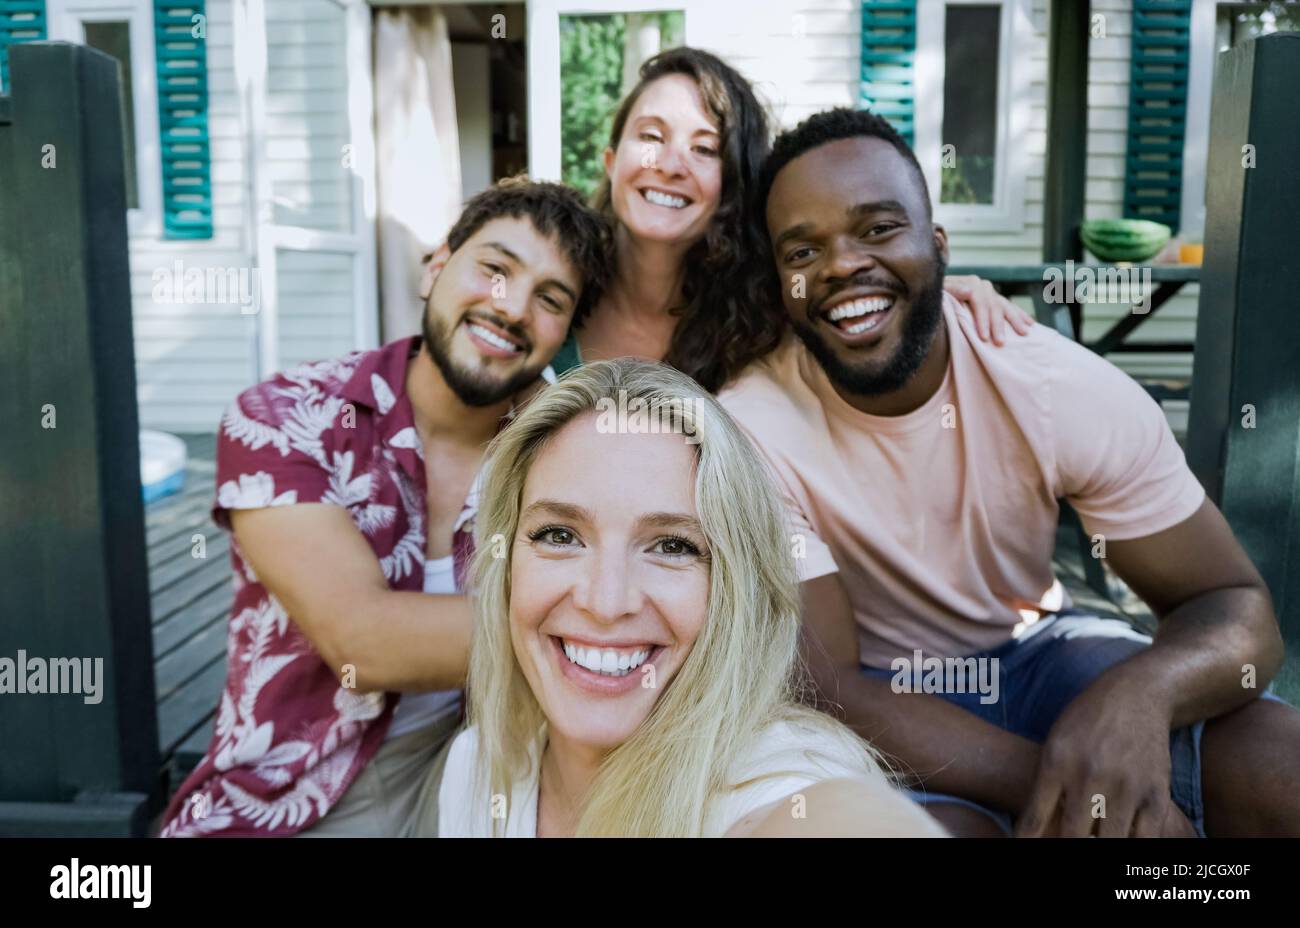 Multiethnic young friends taking selfie outdoor - Young people having fun at summer house - Focus on center girl face Stock Photo